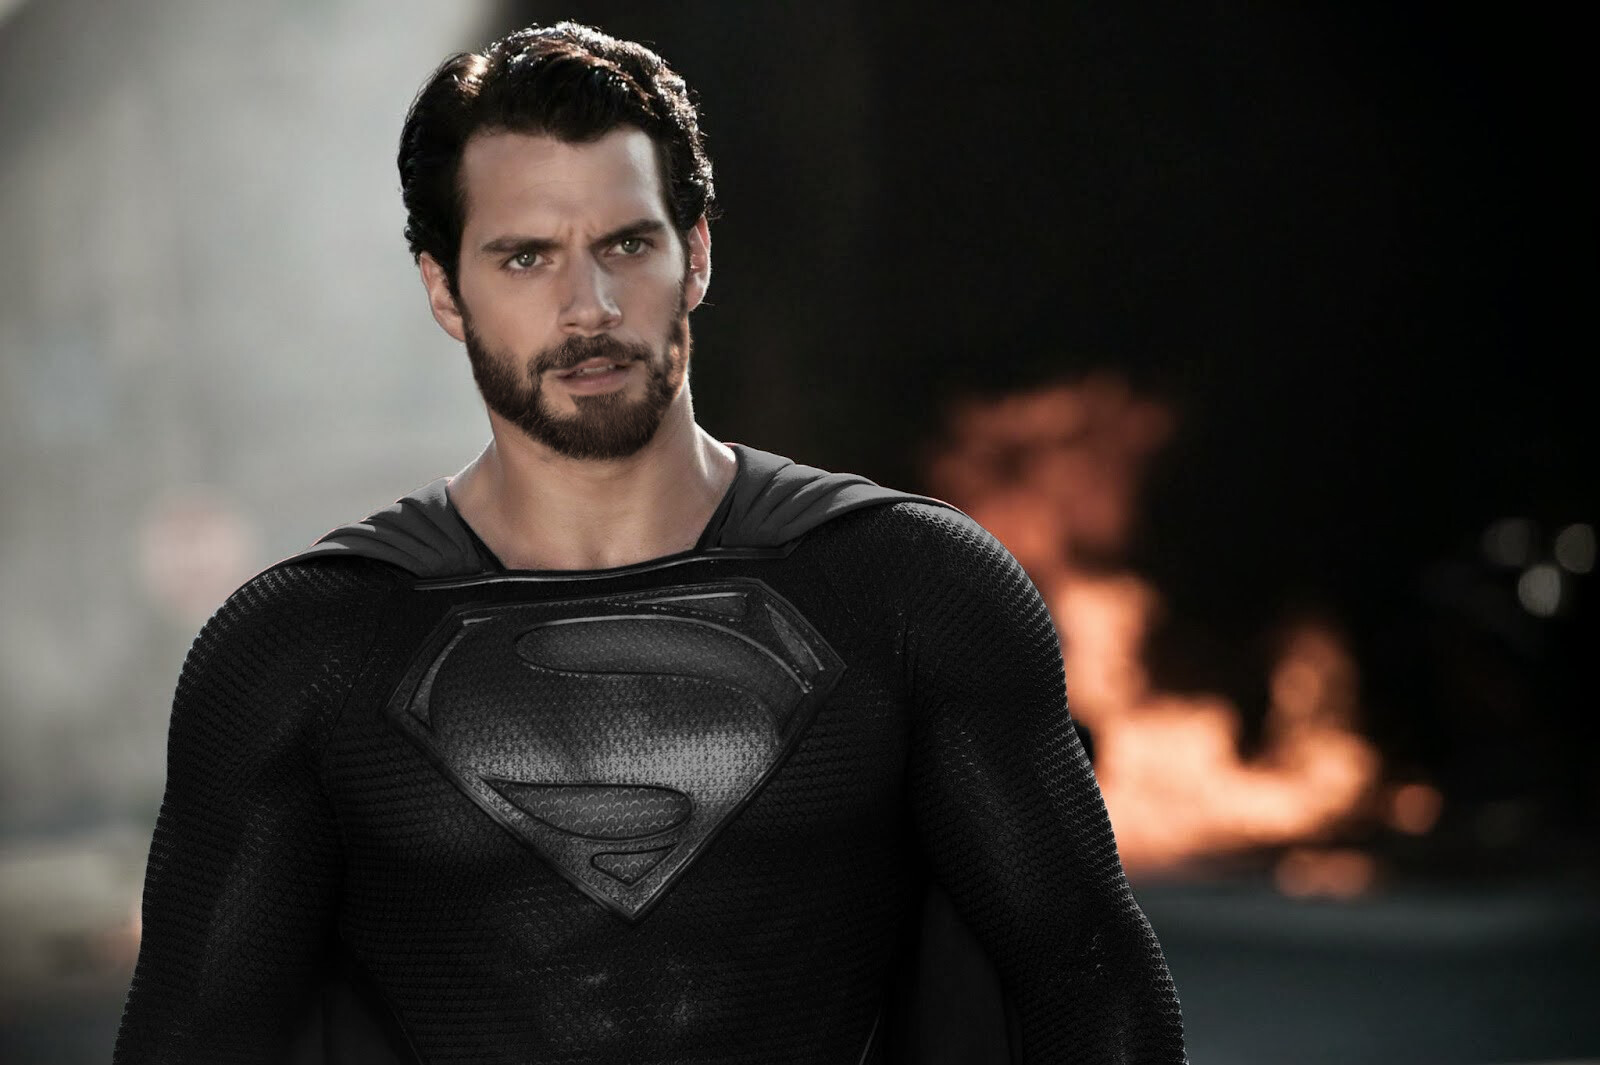 Superman may wear a black suit in Justice League